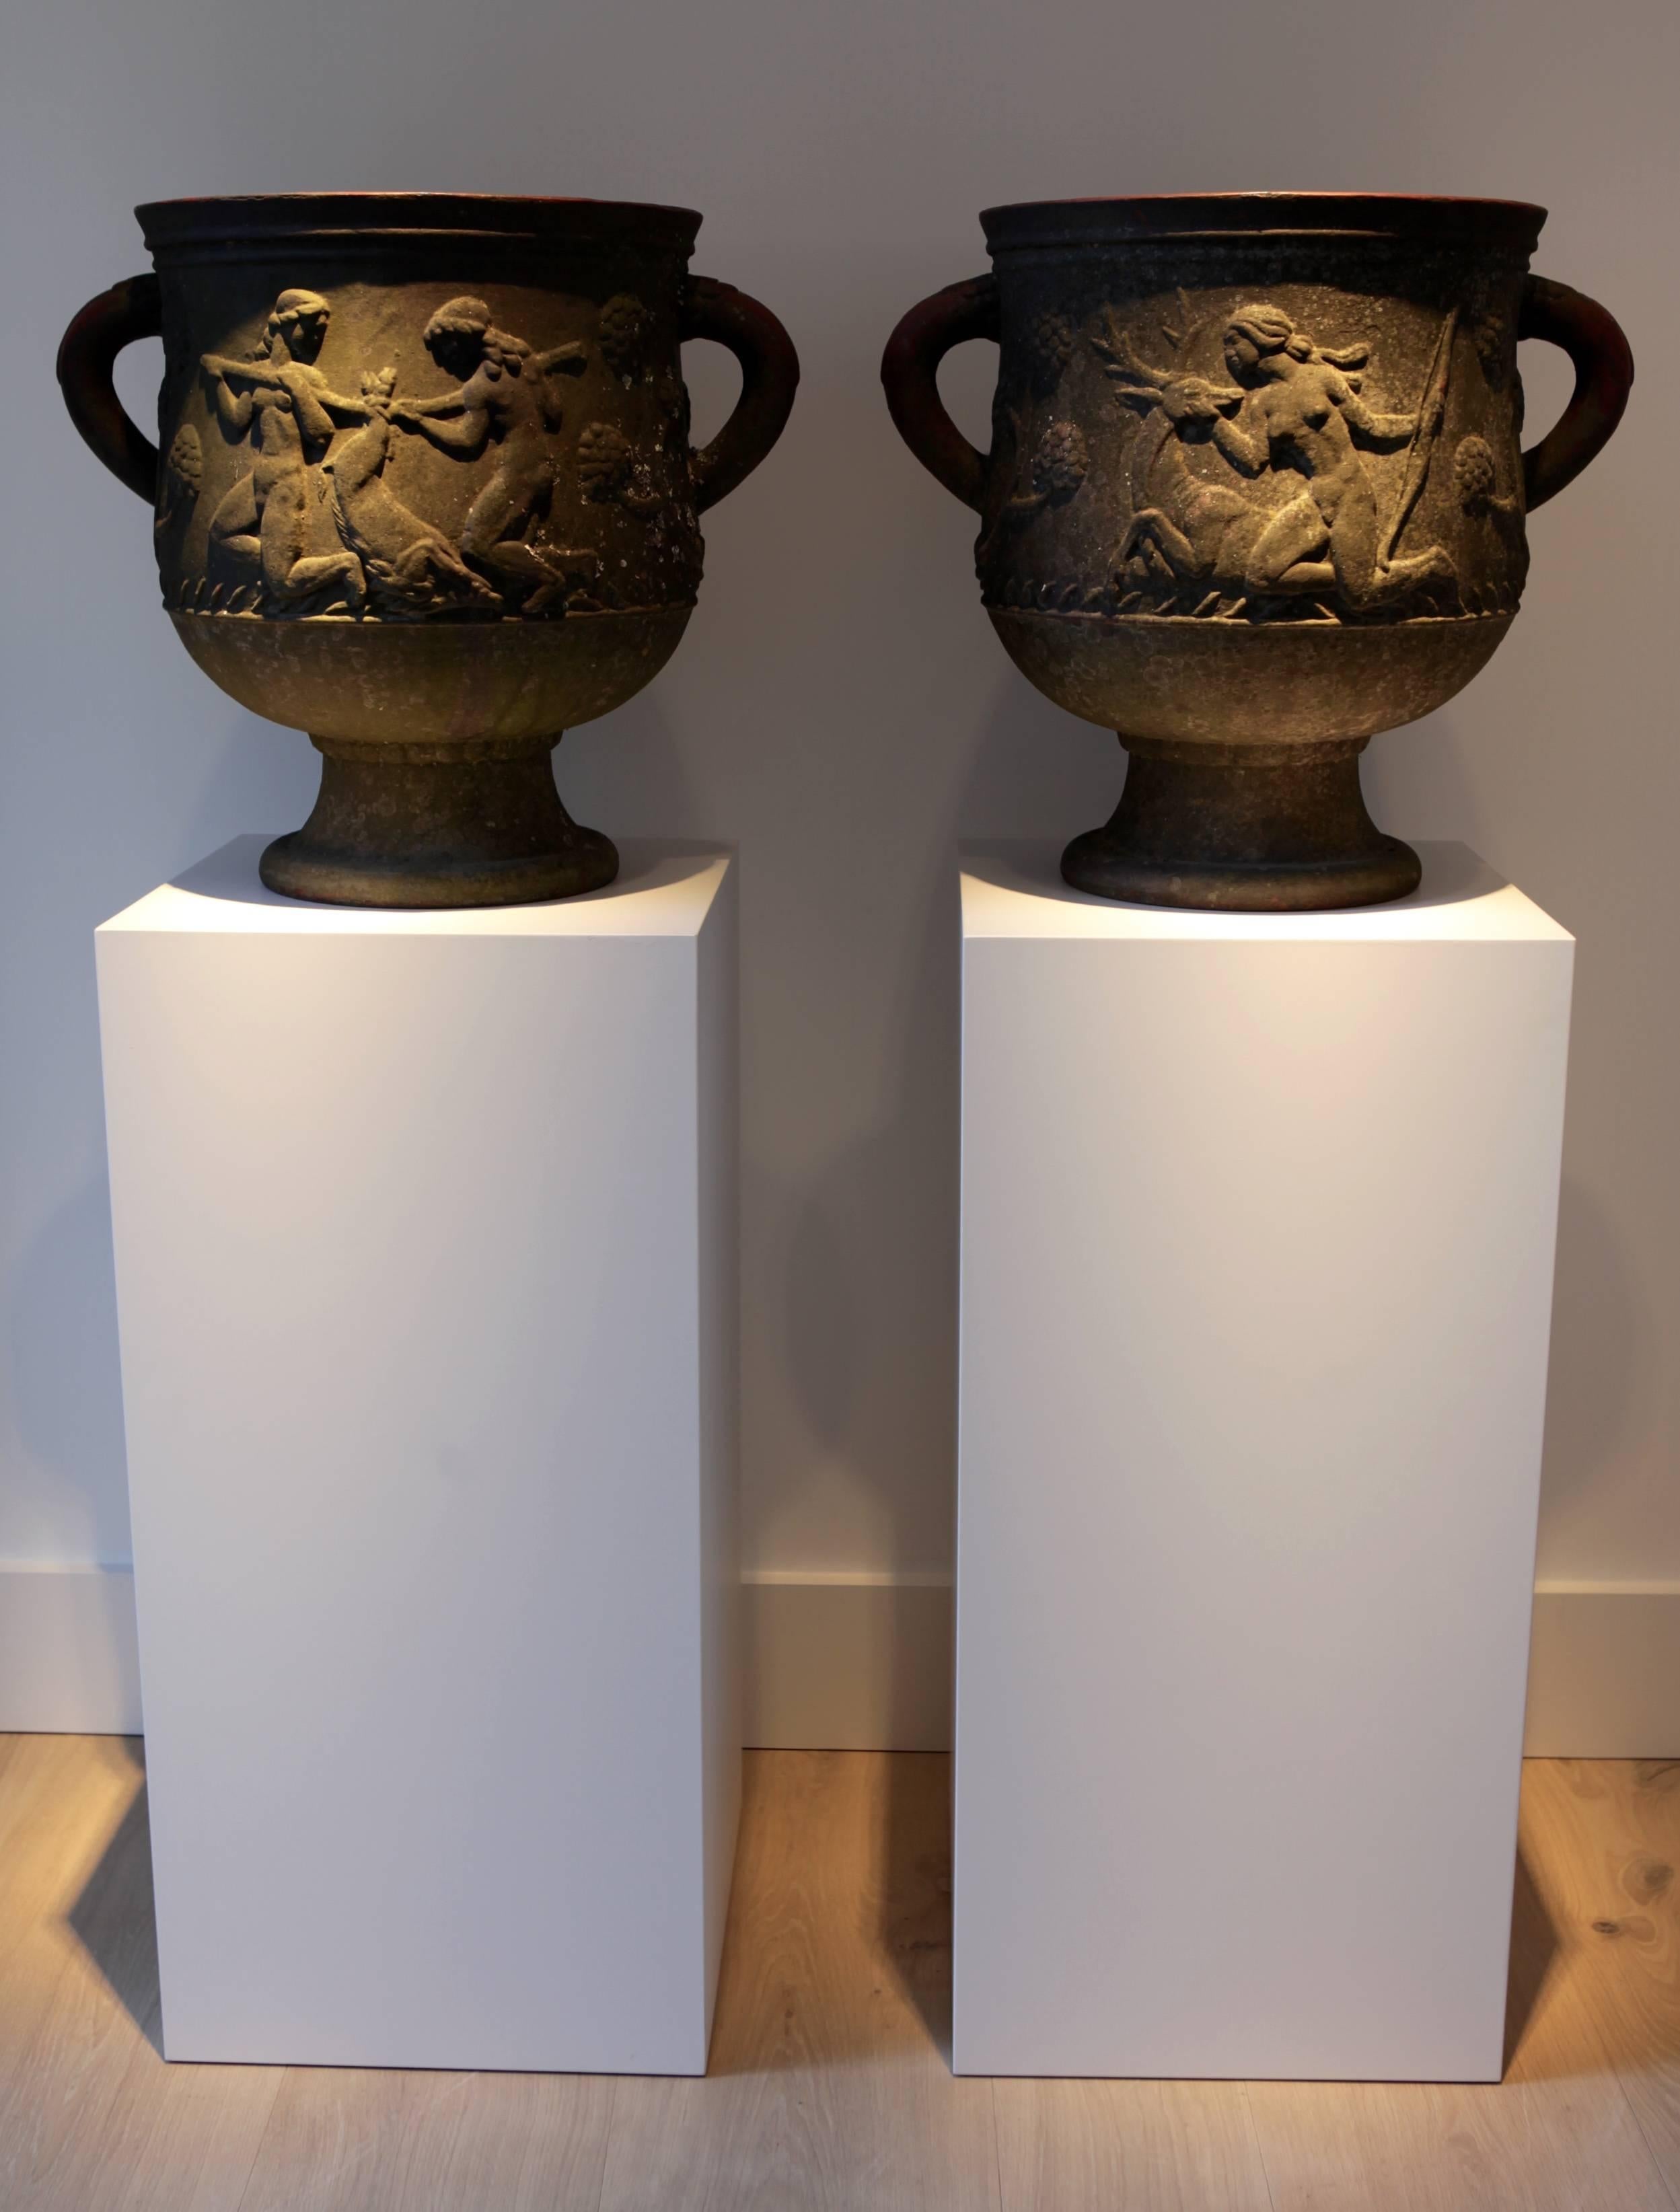 A pair of Ivar Johnsson (1885-1970) cast iron urns, Näfveqvarn,

Relief showing the hunting goddess Diana, 

signed, and dated, IJ 1919.
 